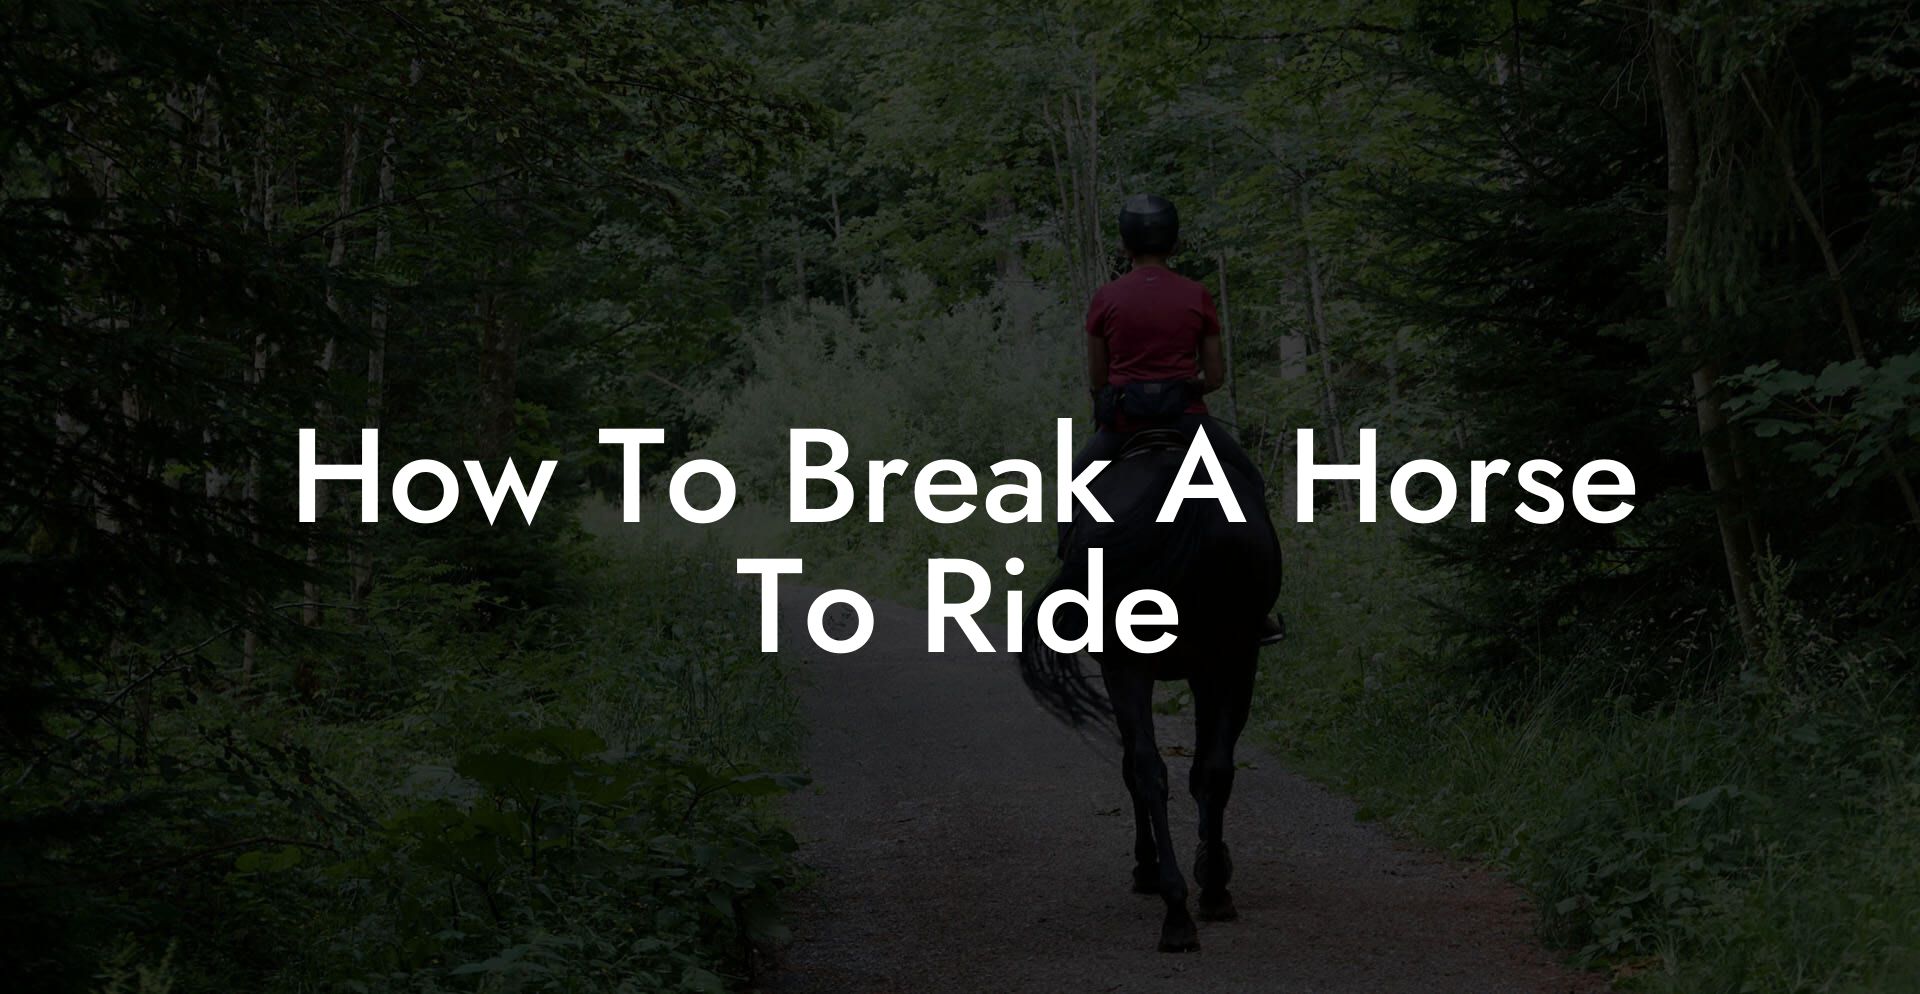 How To Break A Horse To Ride